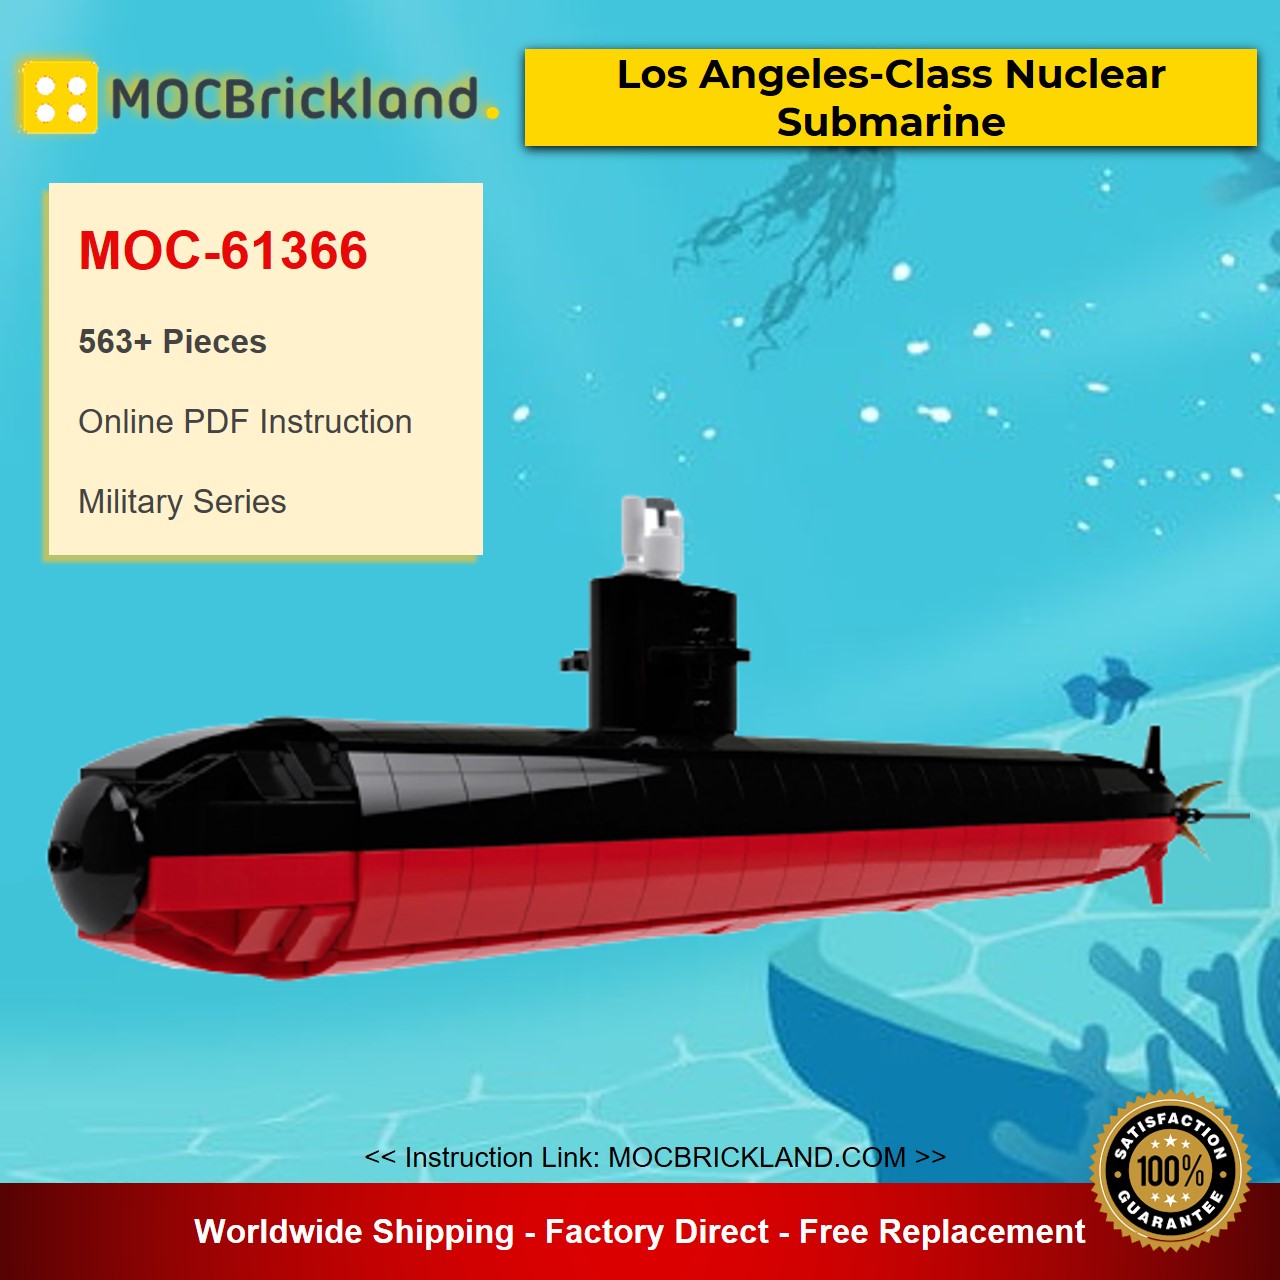 Los Angeles-Class Nuclear Submarine MOC-61366 Star Wars Designed By veyniac With 563 Pieces